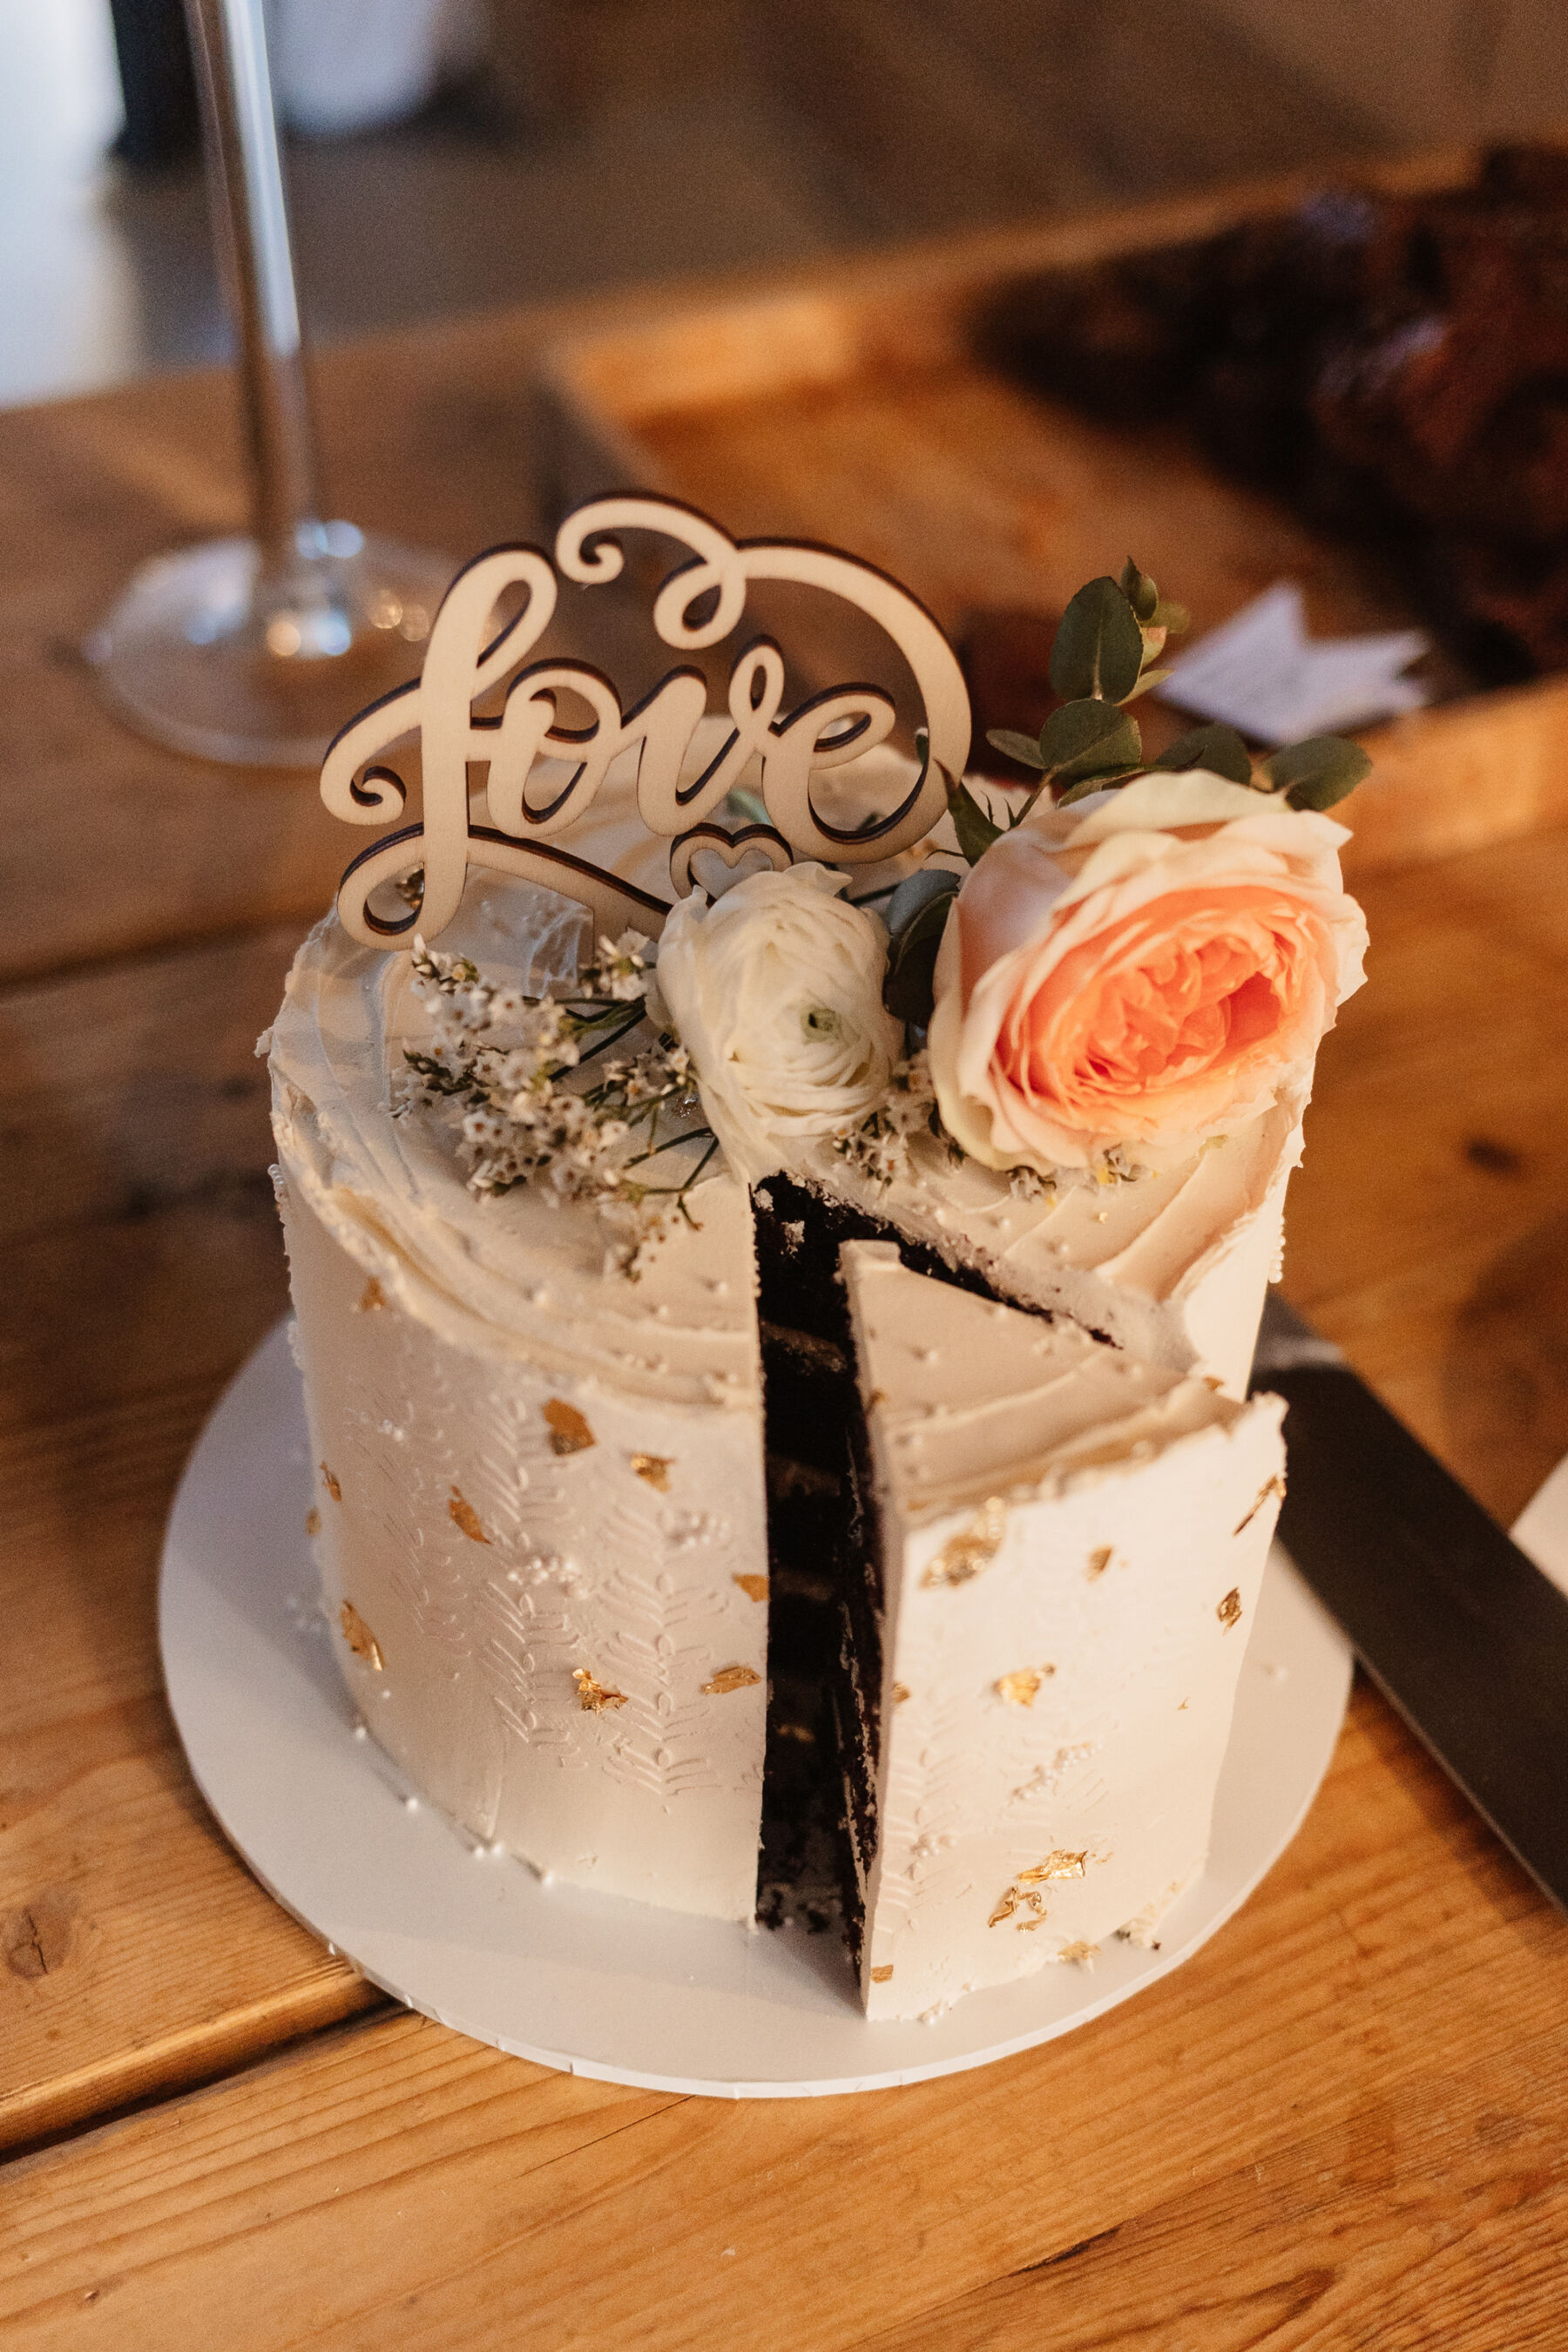 Single tier wedding cake topped with a wooden word 'Love' and a peach rose.